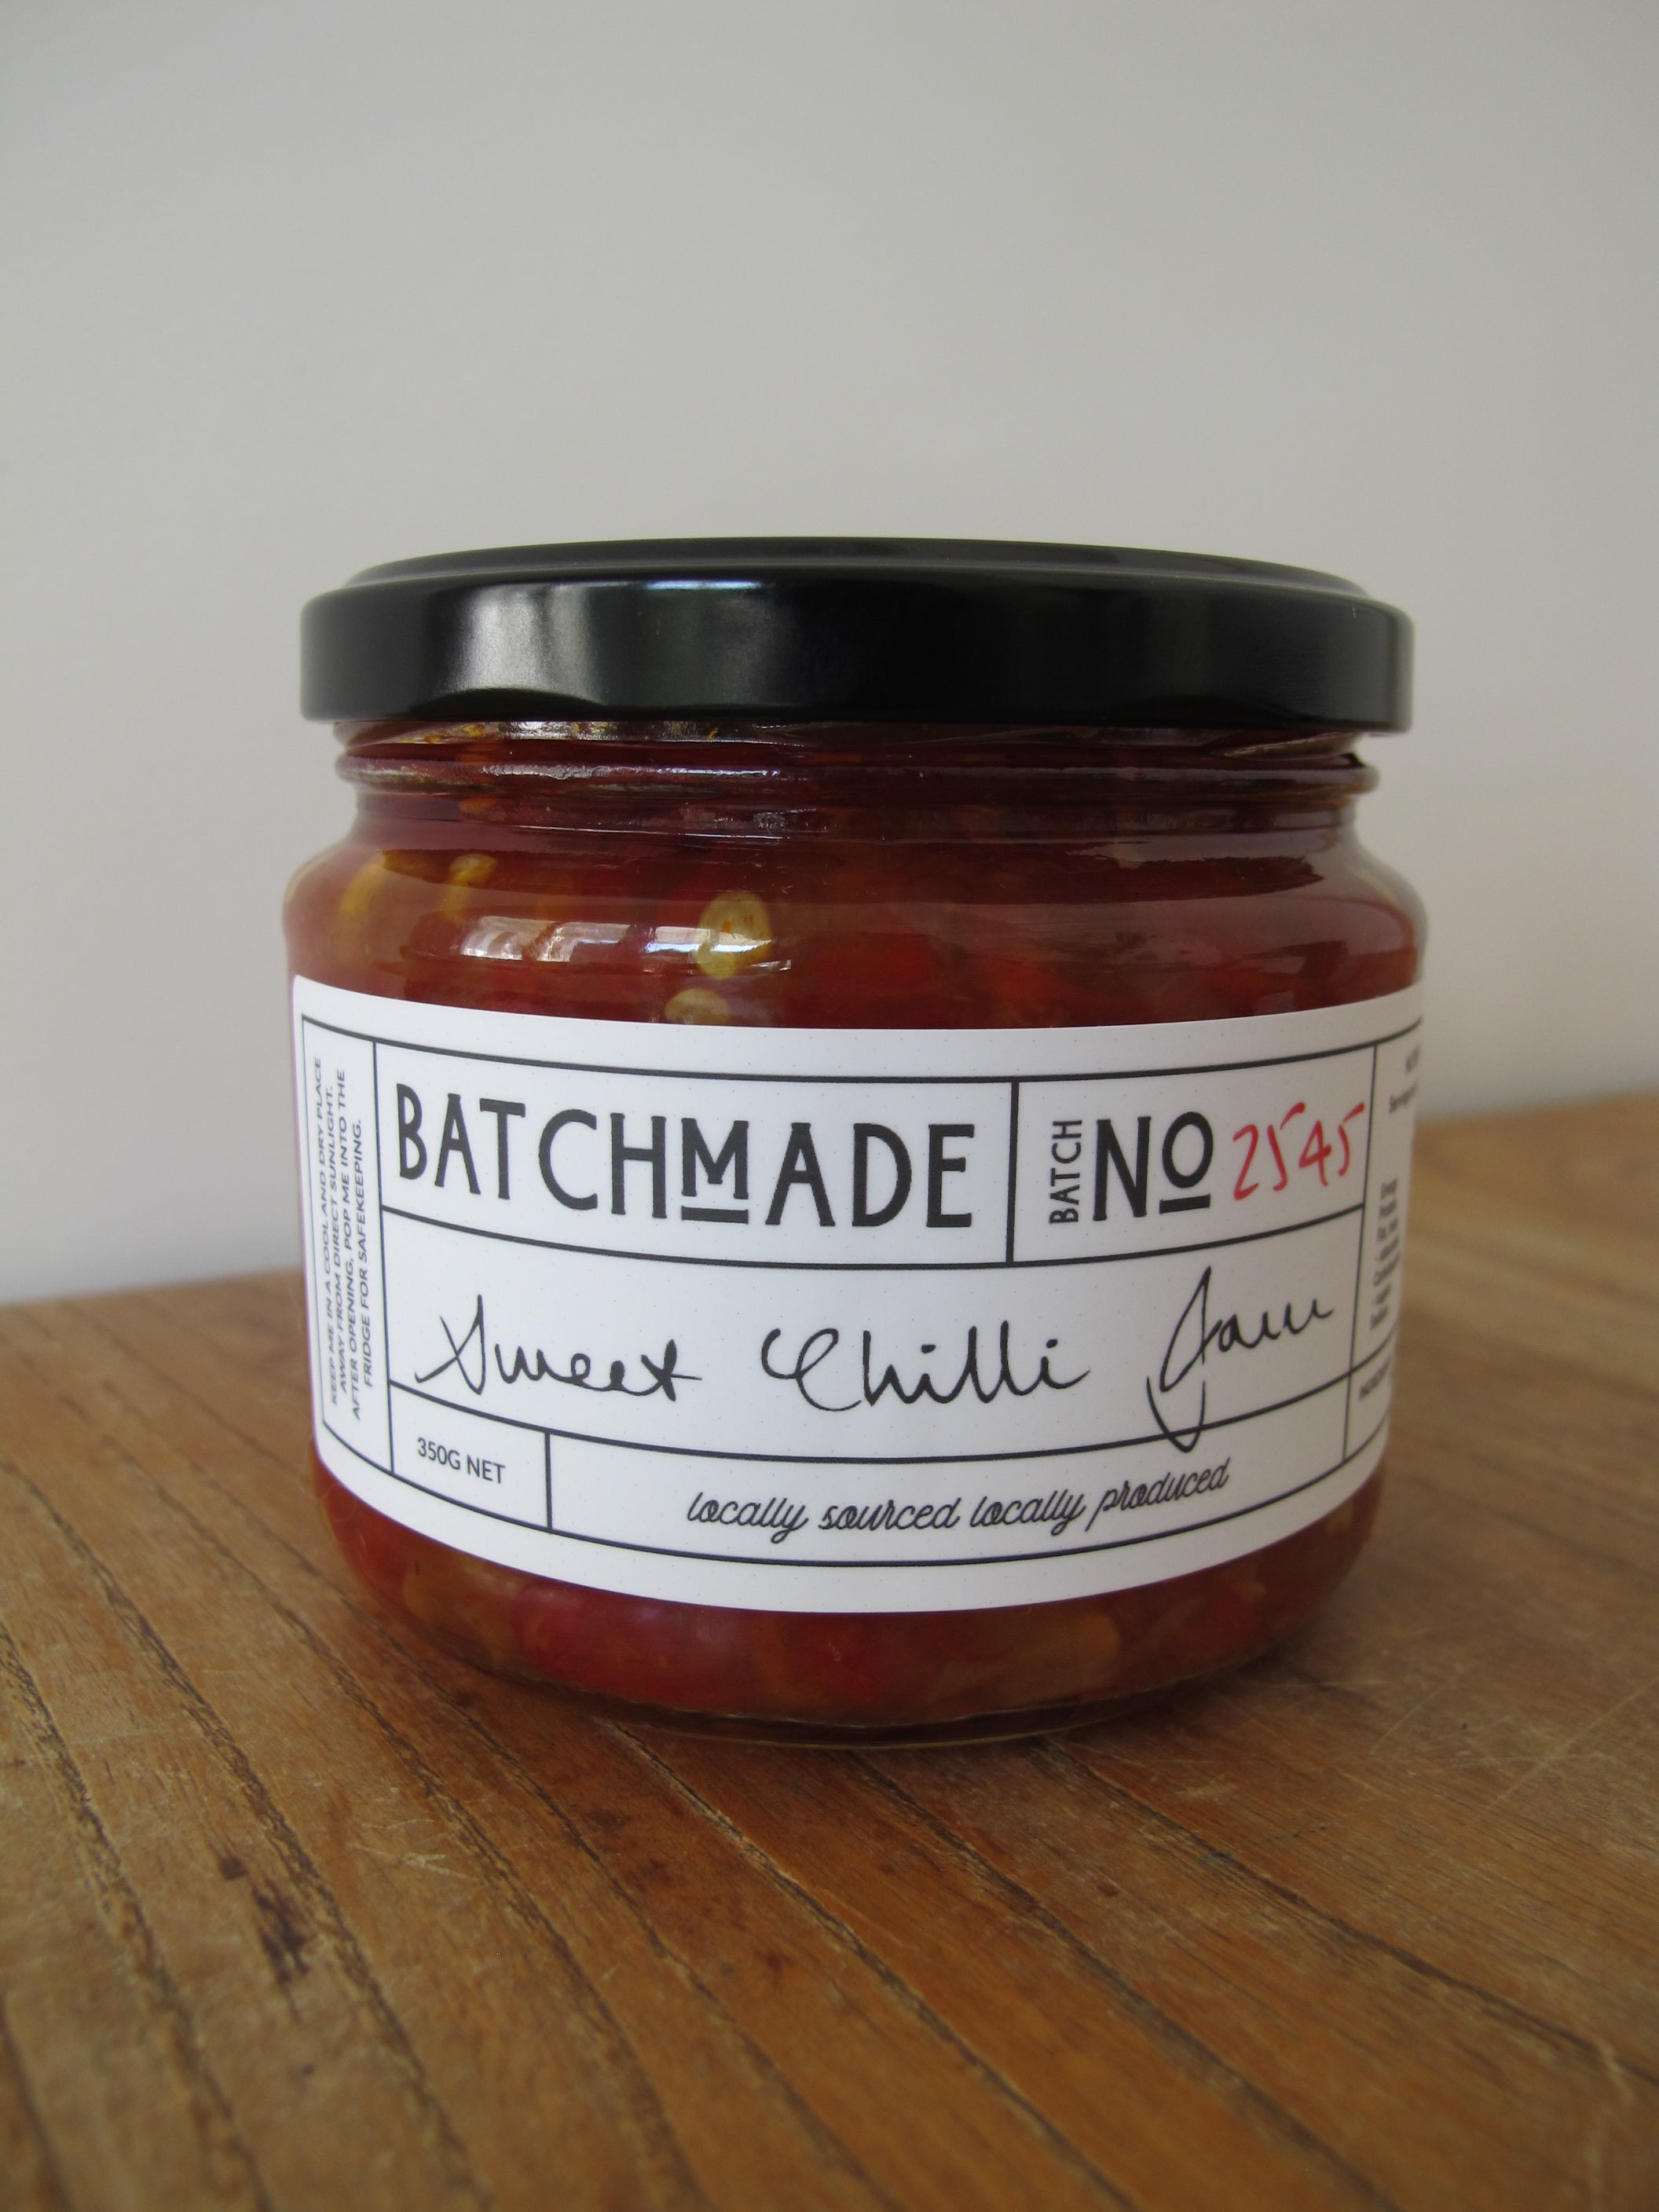 Sweet Chilli jam by BatchMade